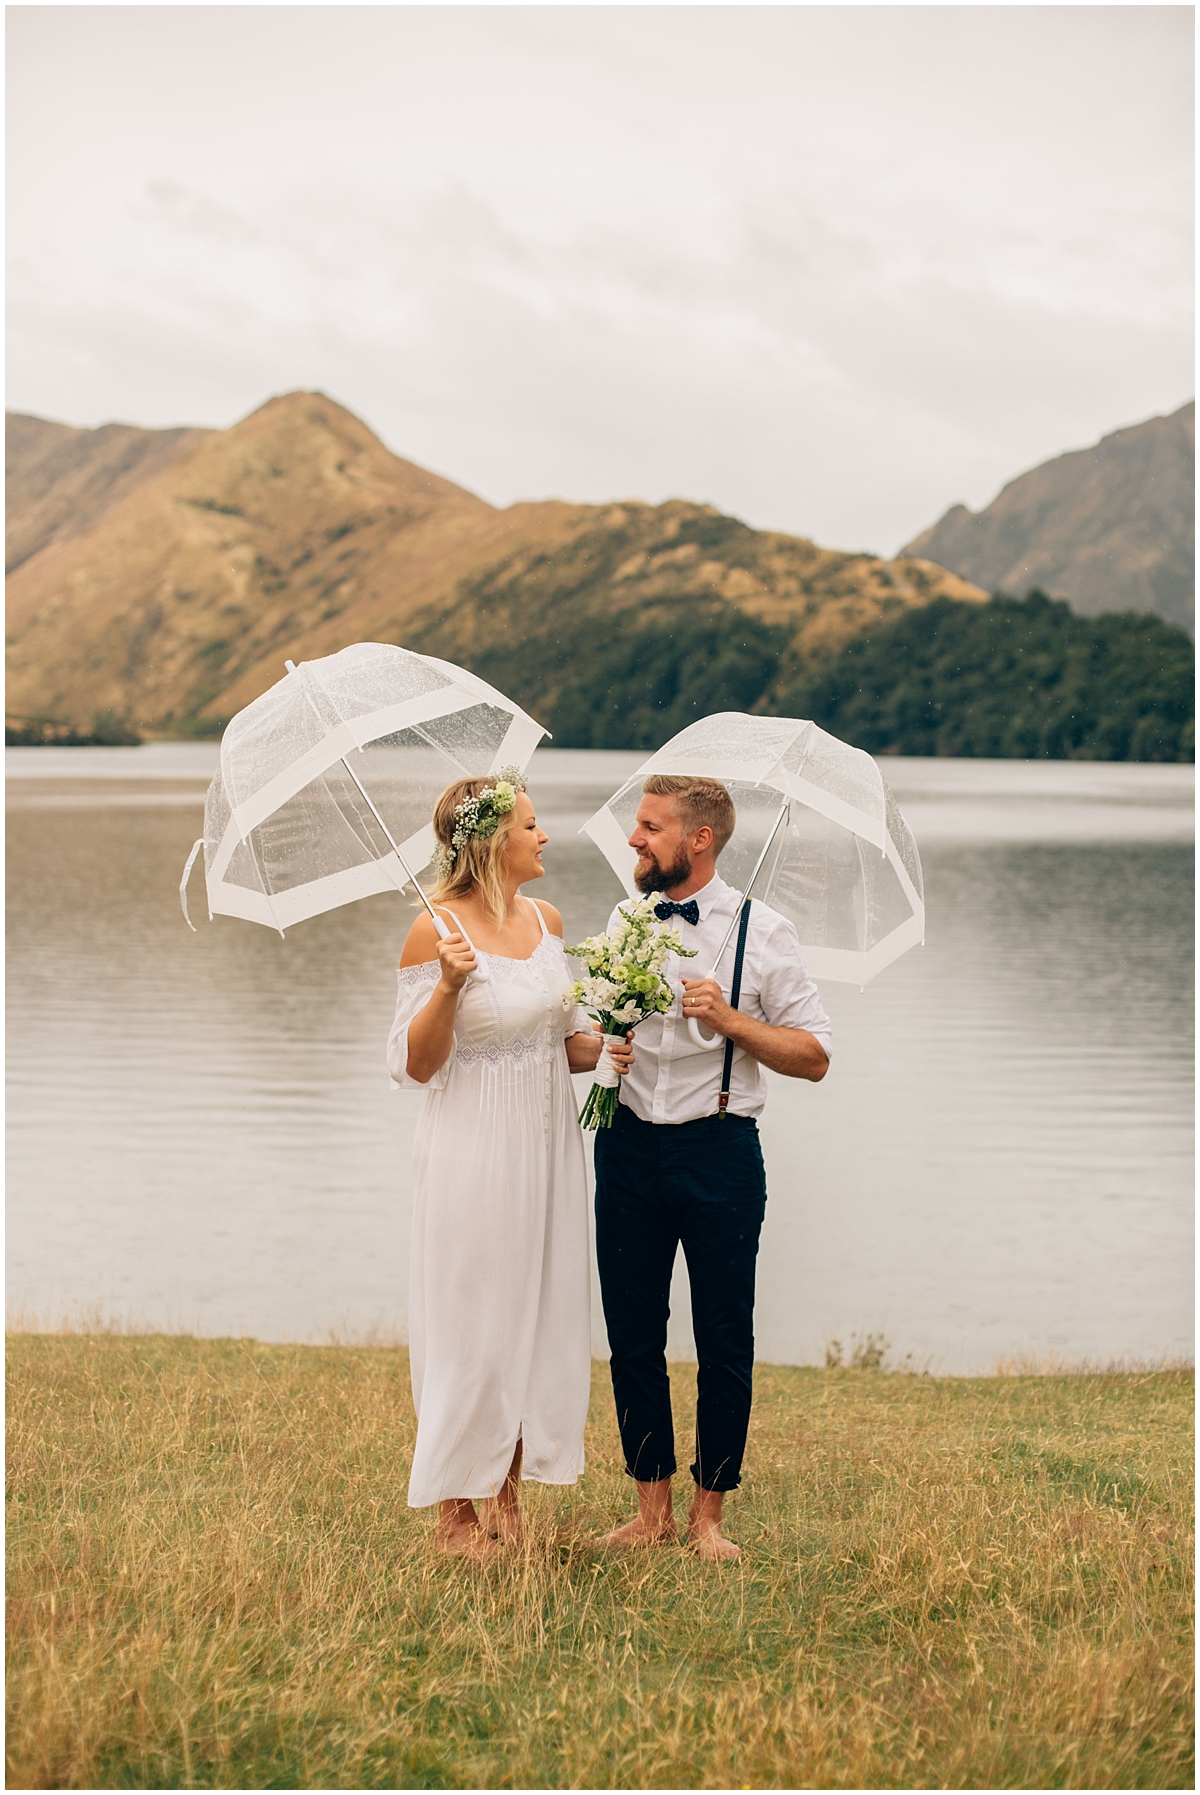 Bride and groom stand at water's edge under umbrellas